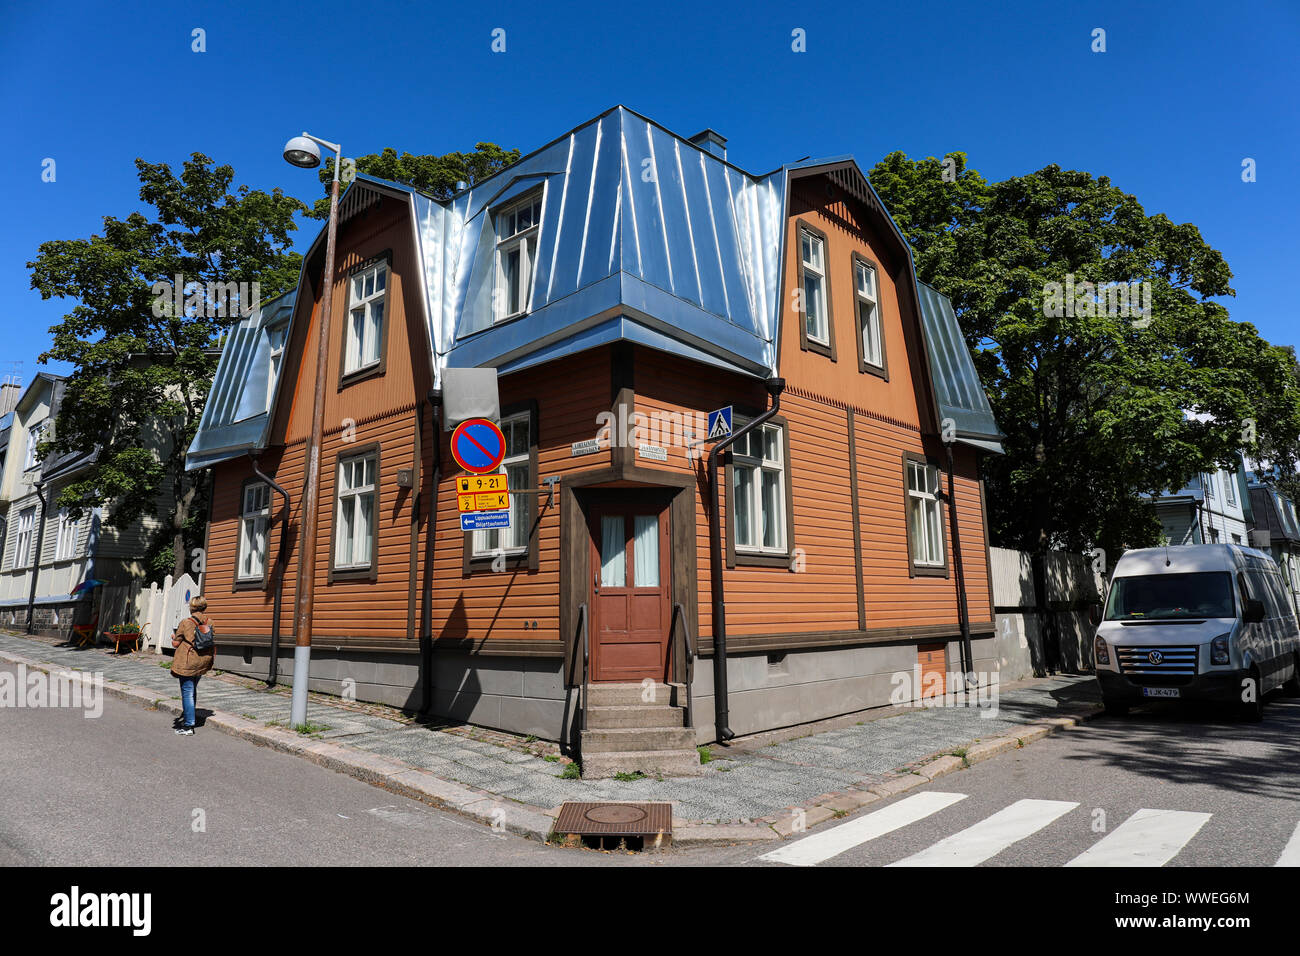 Old wooden building with shiny new metal roof on the corner of Virtaintie and Suvannontie in Helsinki, Finland Stock Photo